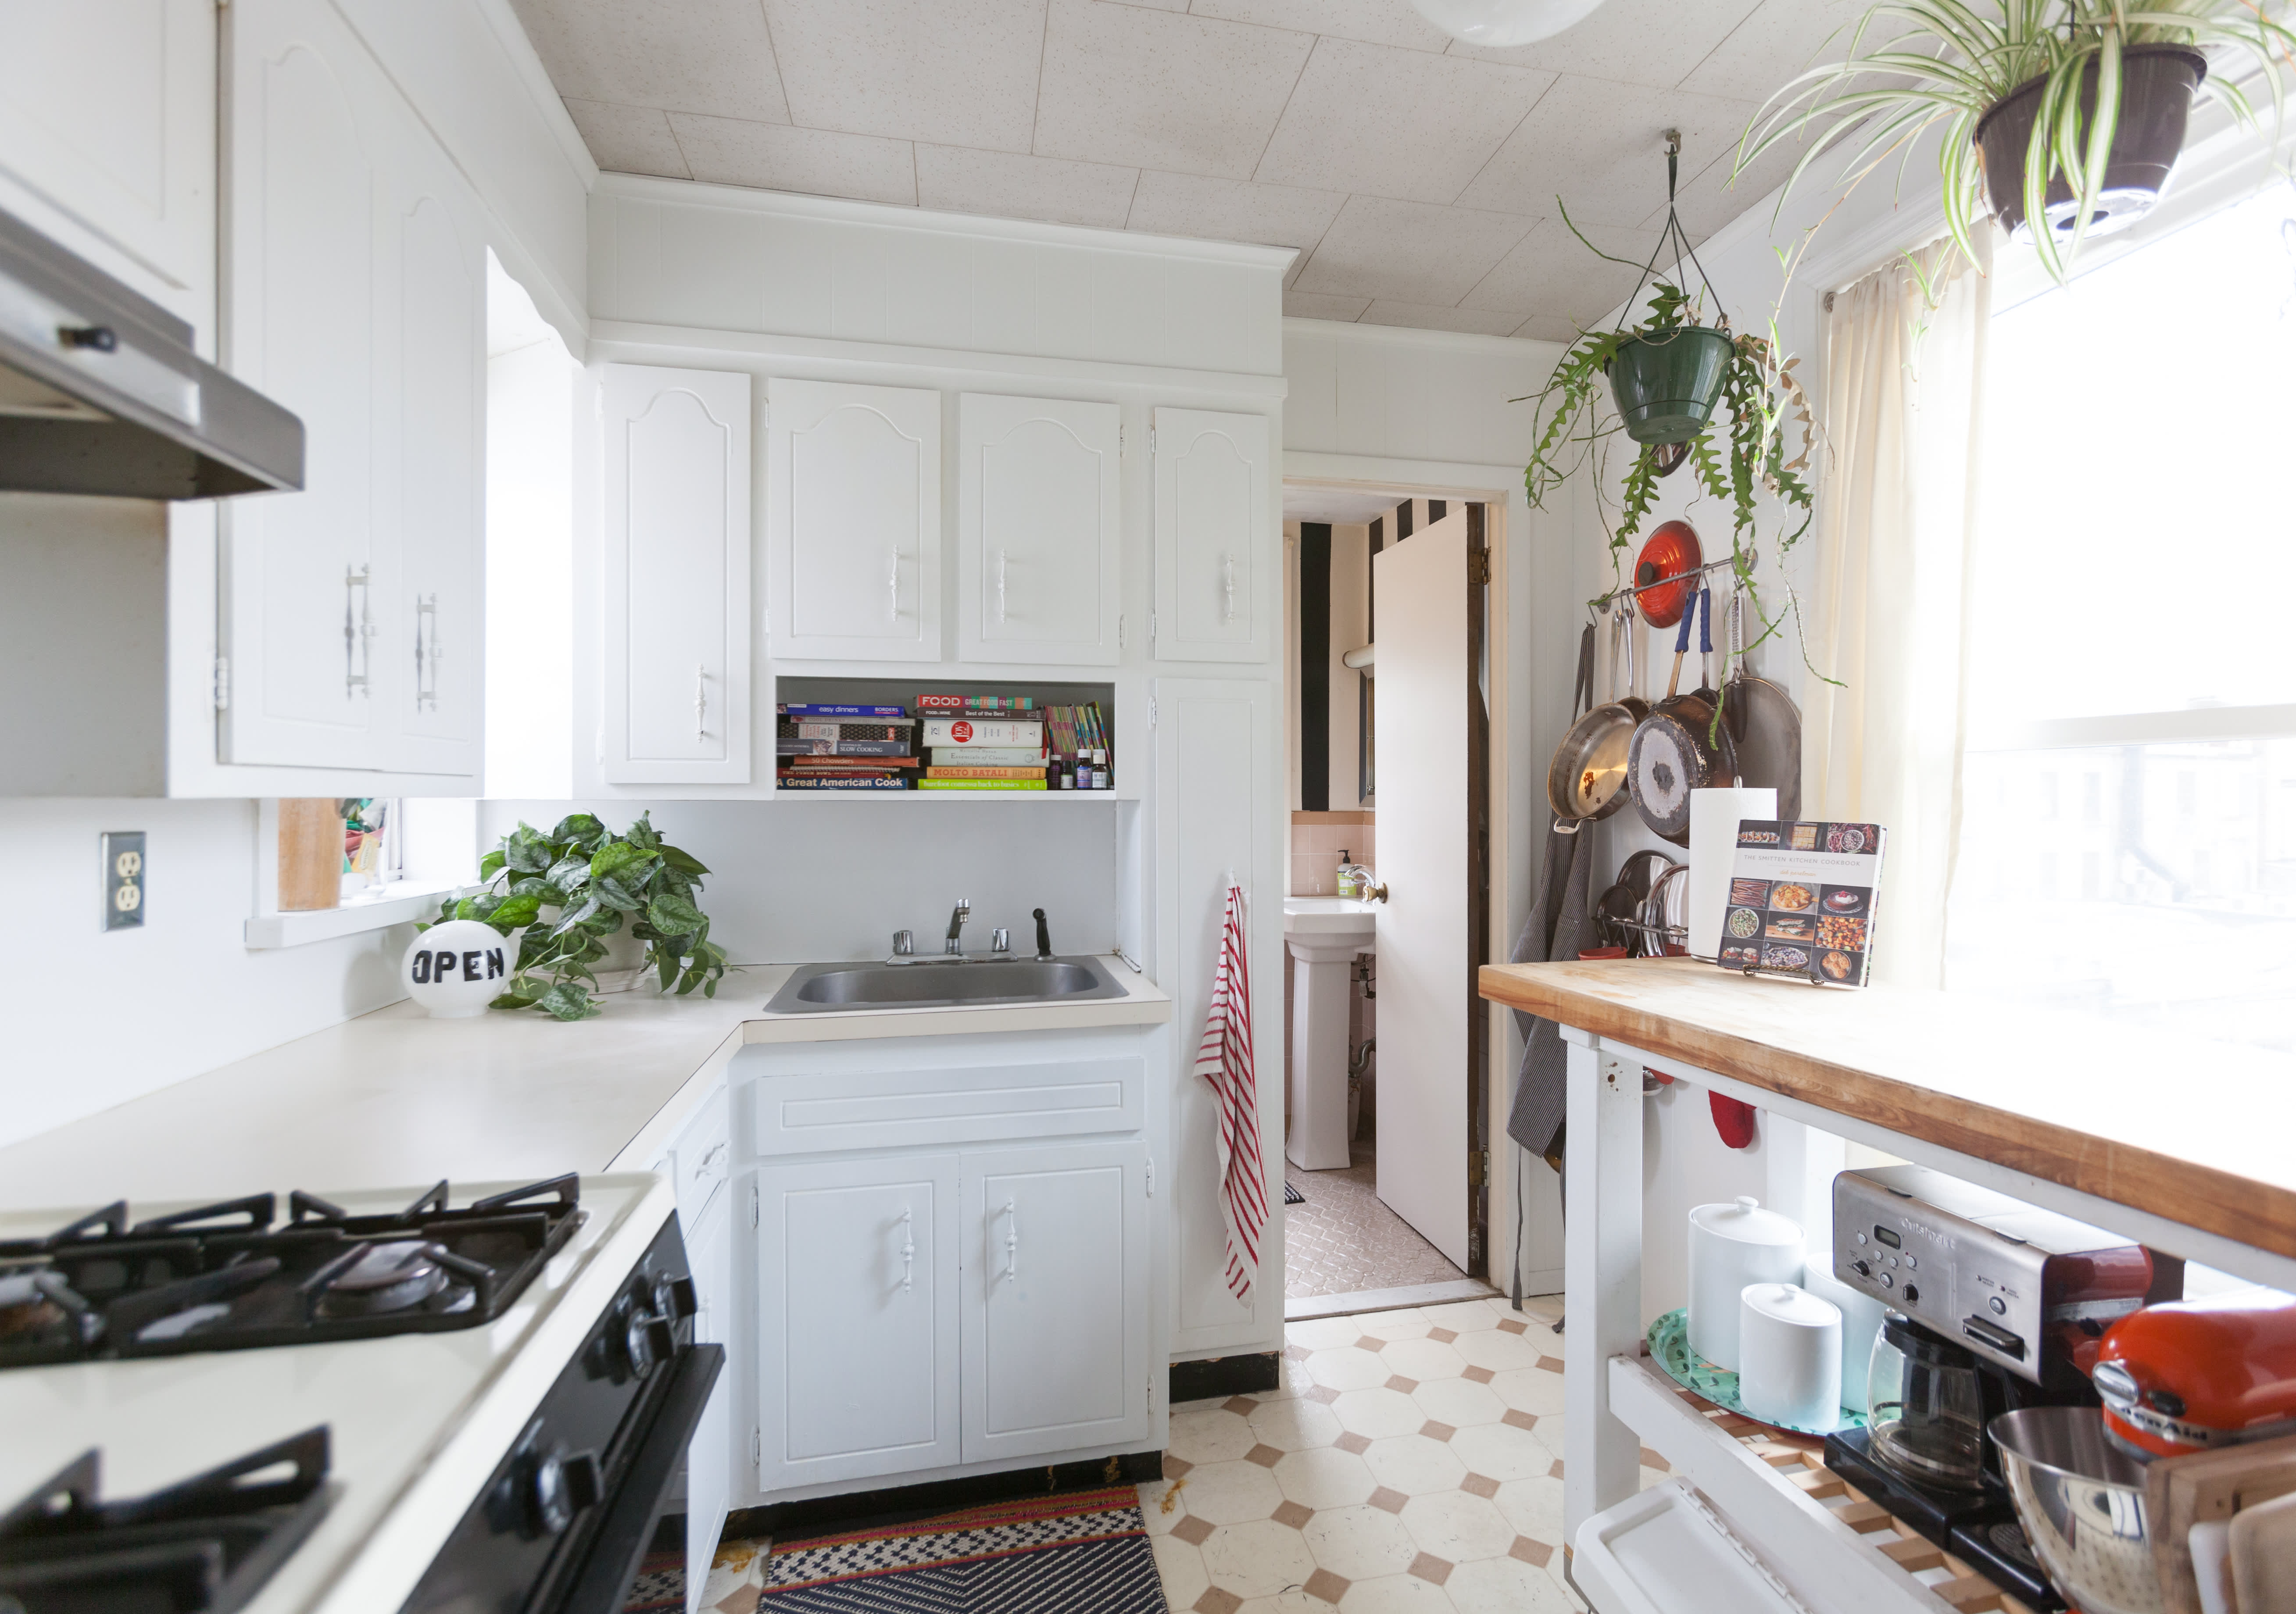 Kitchen Cabinet Styles: The Differences Between Stock ...